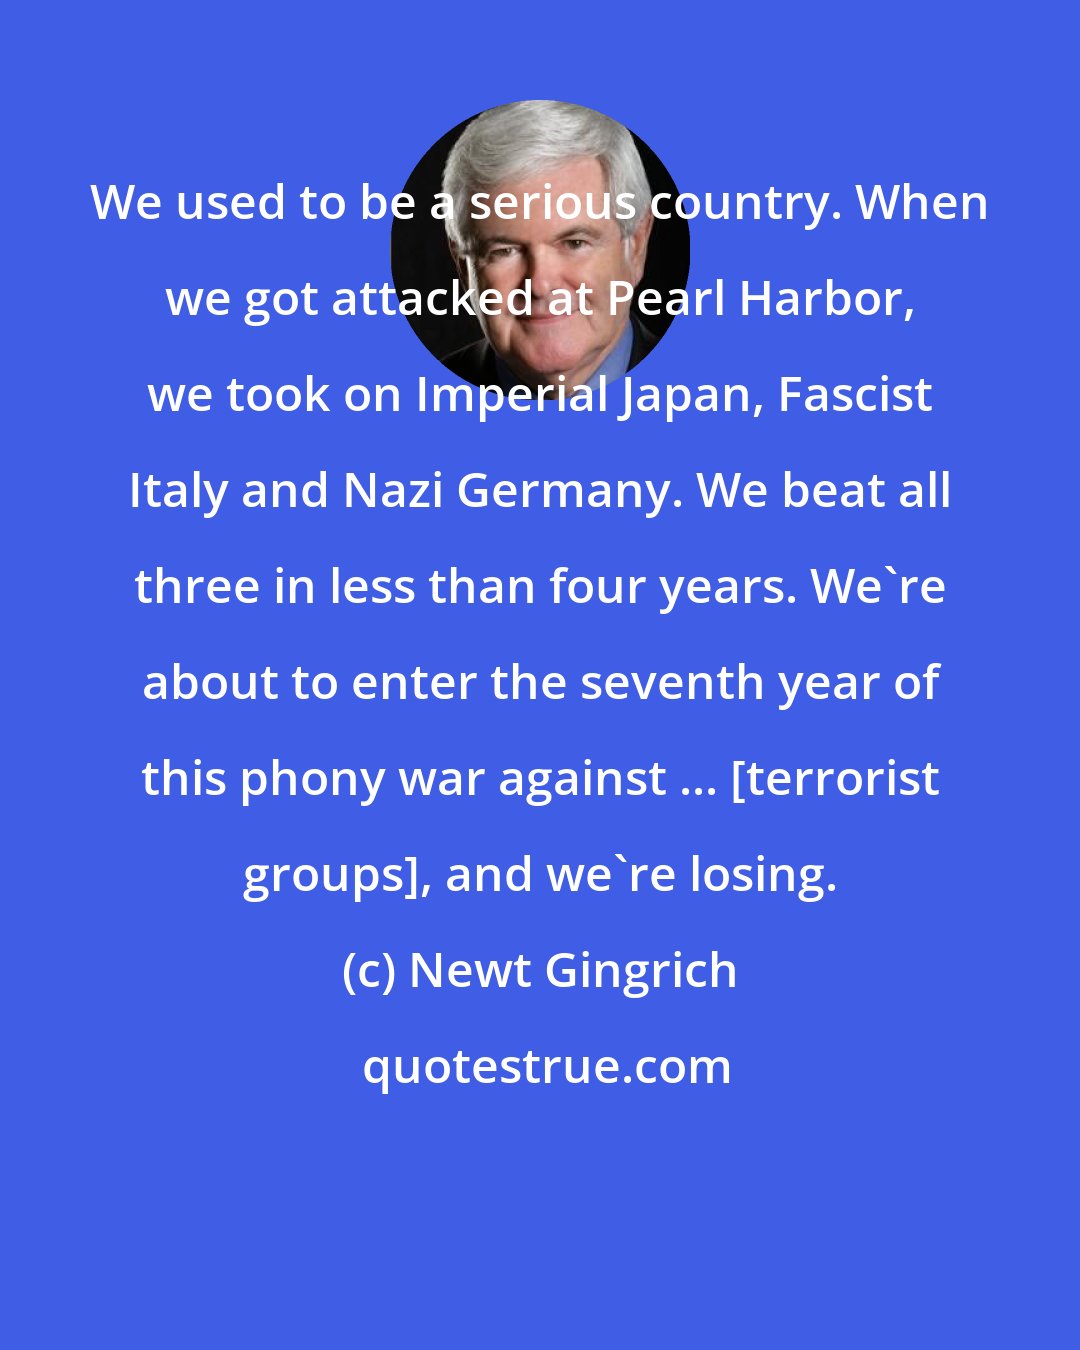 Newt Gingrich: We used to be a serious country. When we got attacked at Pearl Harbor, we took on Imperial Japan, Fascist Italy and Nazi Germany. We beat all three in less than four years. We're about to enter the seventh year of this phony war against ... [terrorist groups], and we're losing.